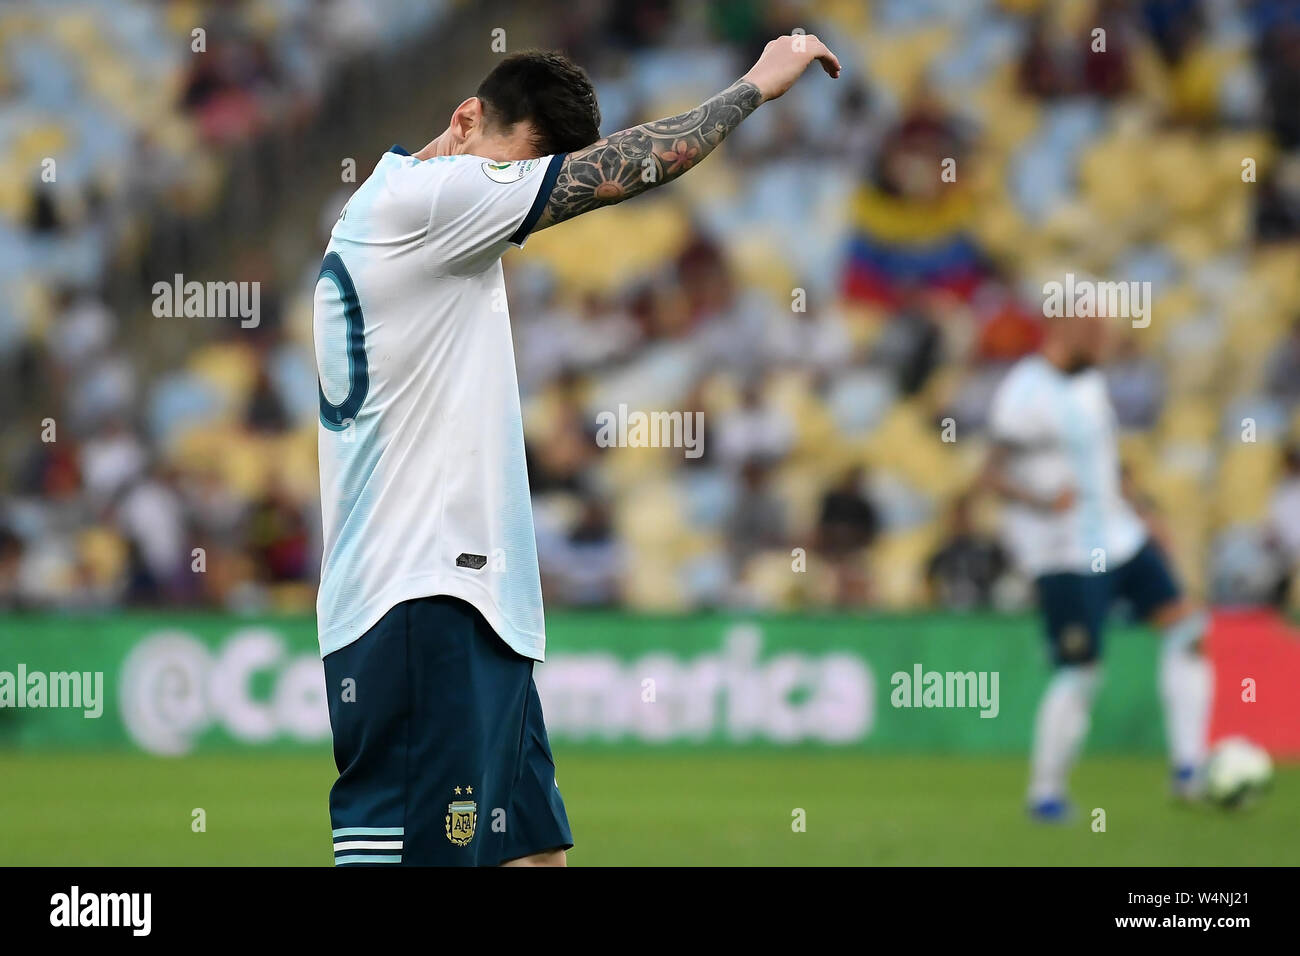 Soccer player Lionel Messi of Argentina, during the Venezuela vs Argentina match for the Copa America 2019 at the Maracanã stadium. Stock Photo